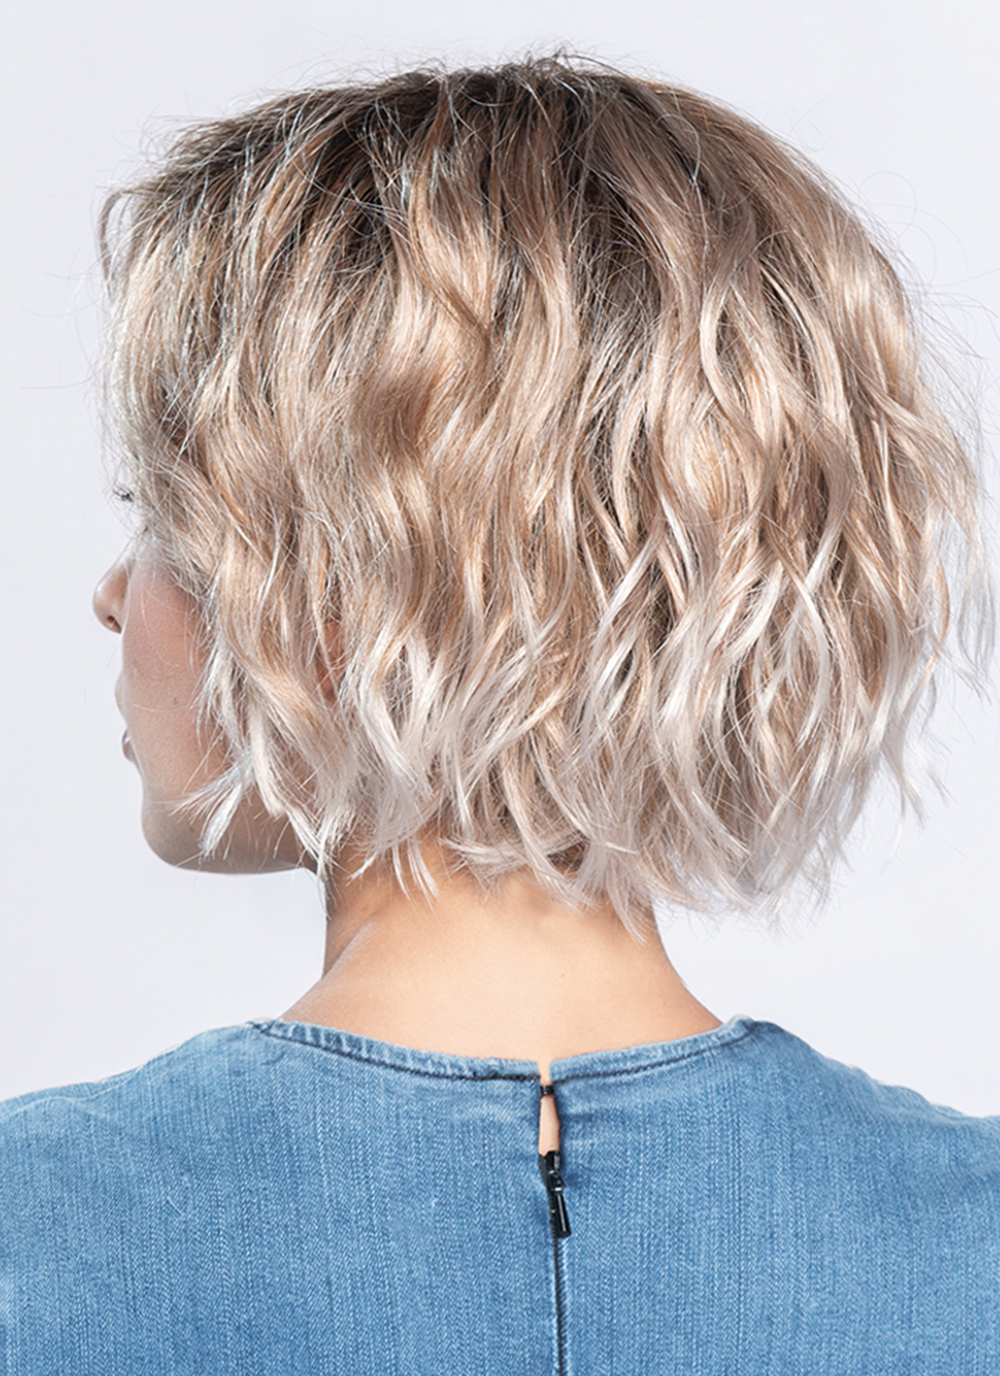 Dance by Ellen Wille |  Ready-to-wear, pre-styled and designed to look and feel like natural hair.